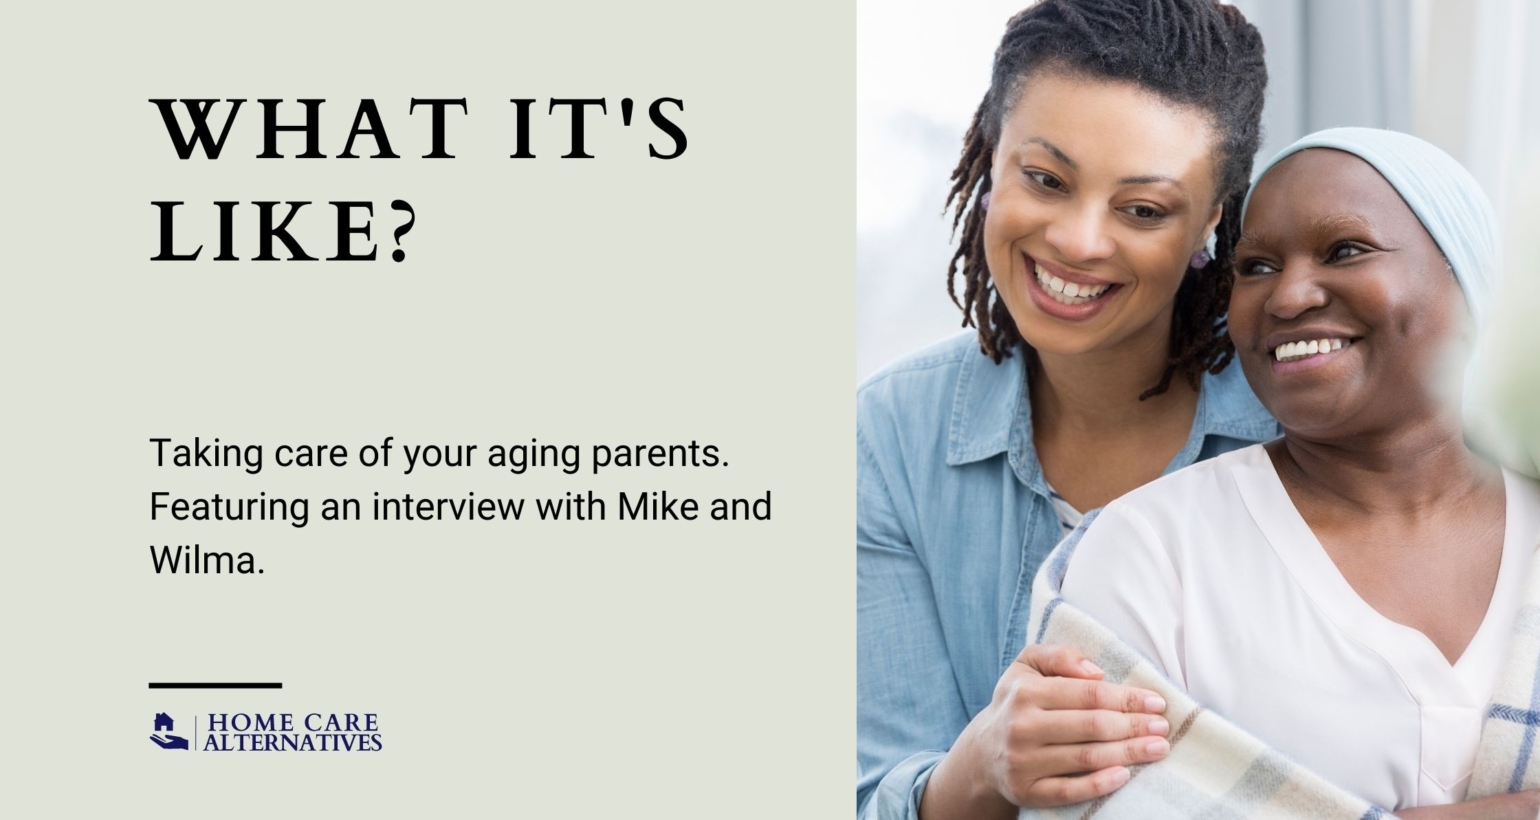 Taking Care of Aging Parents